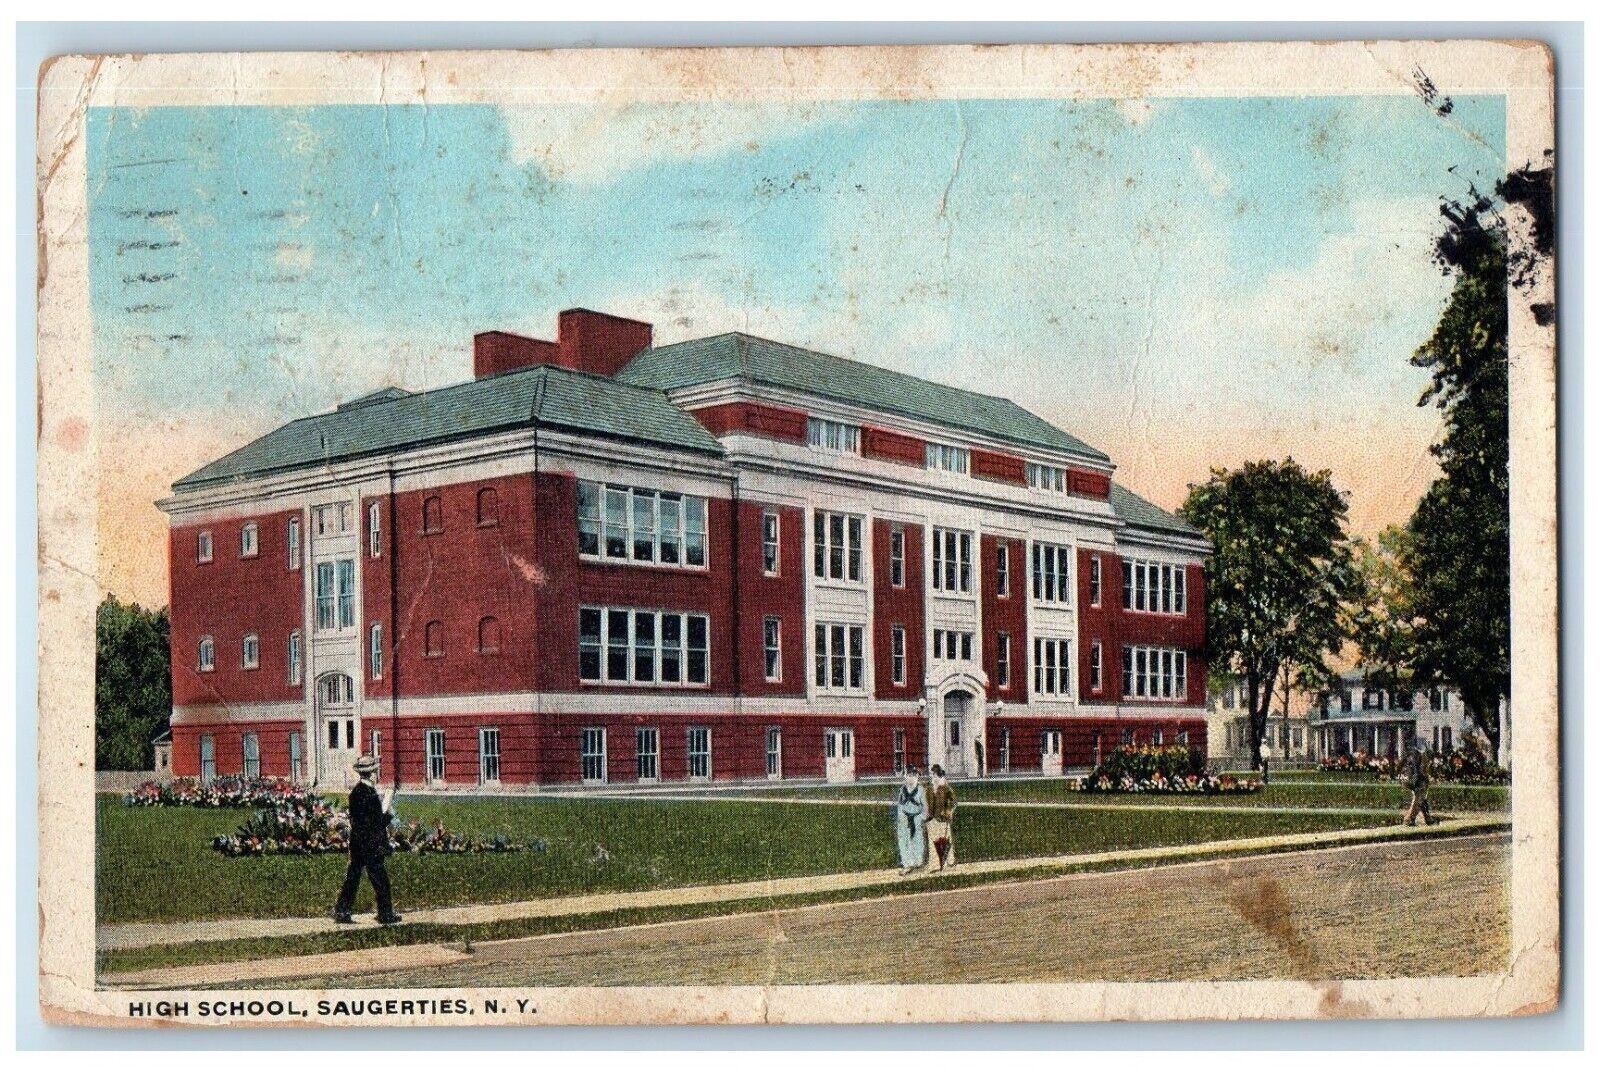 1926 High School Saugerties Kingston New York NY Vintage Antique Posted Postcard